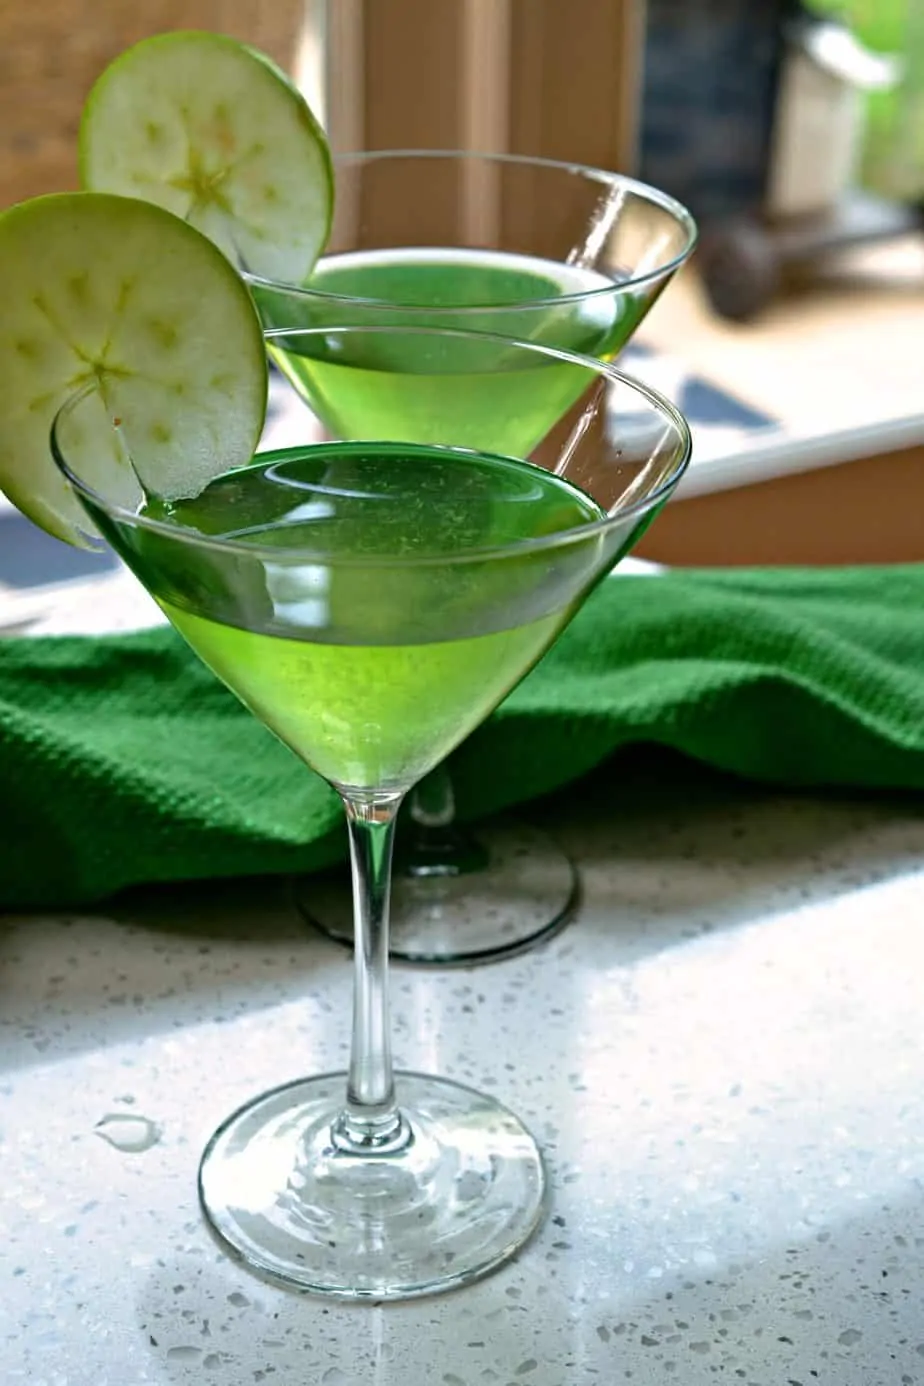  This four ingredient Appletini (Apple Martini) is one of our favorite party cocktails with its superb sour apple flavor.